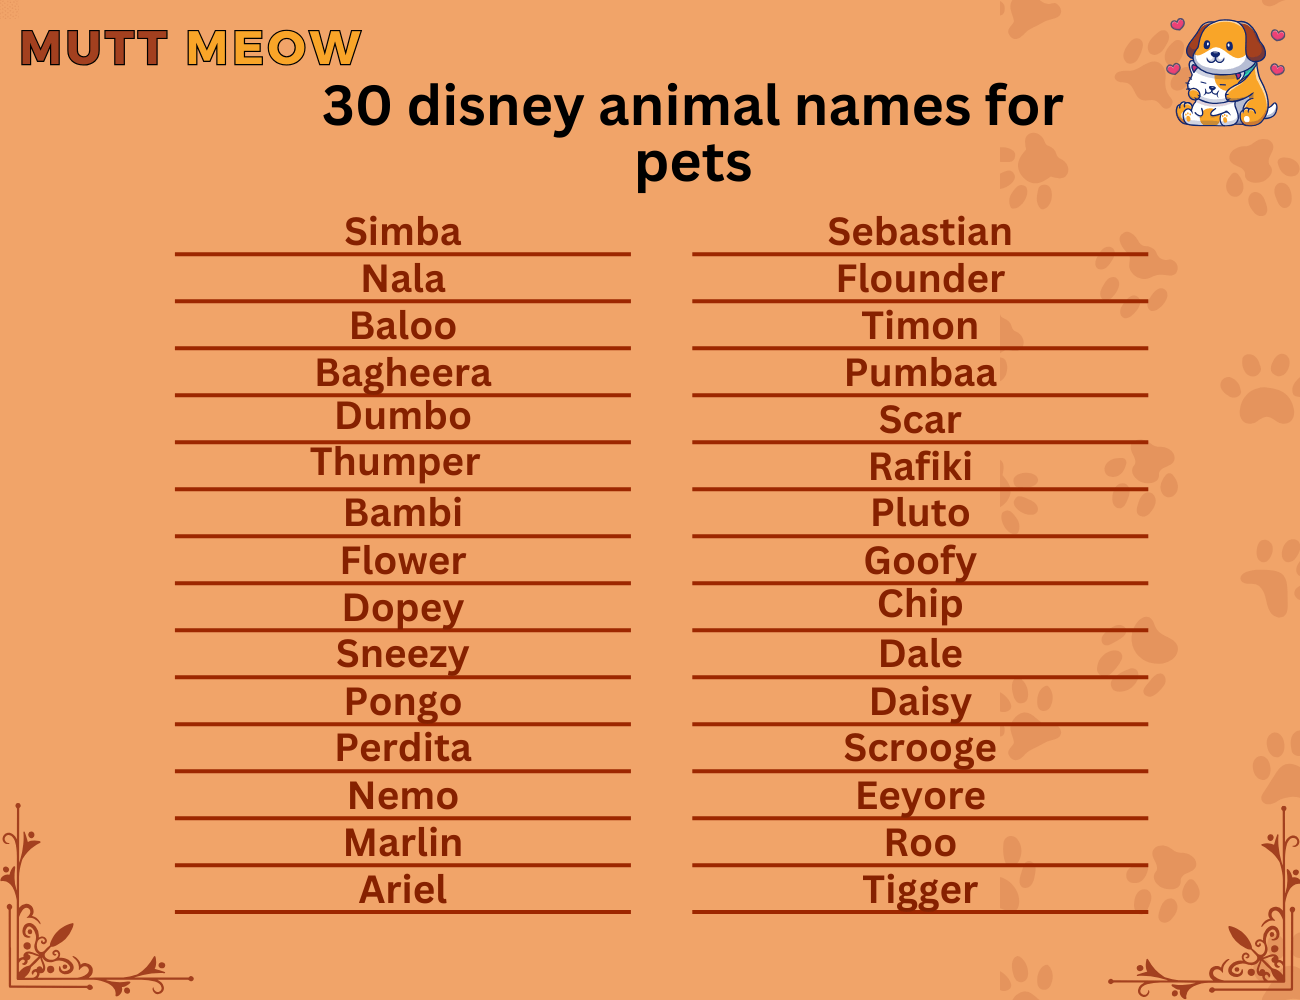 30-disney-animal-names-for-pets-mutt-meow